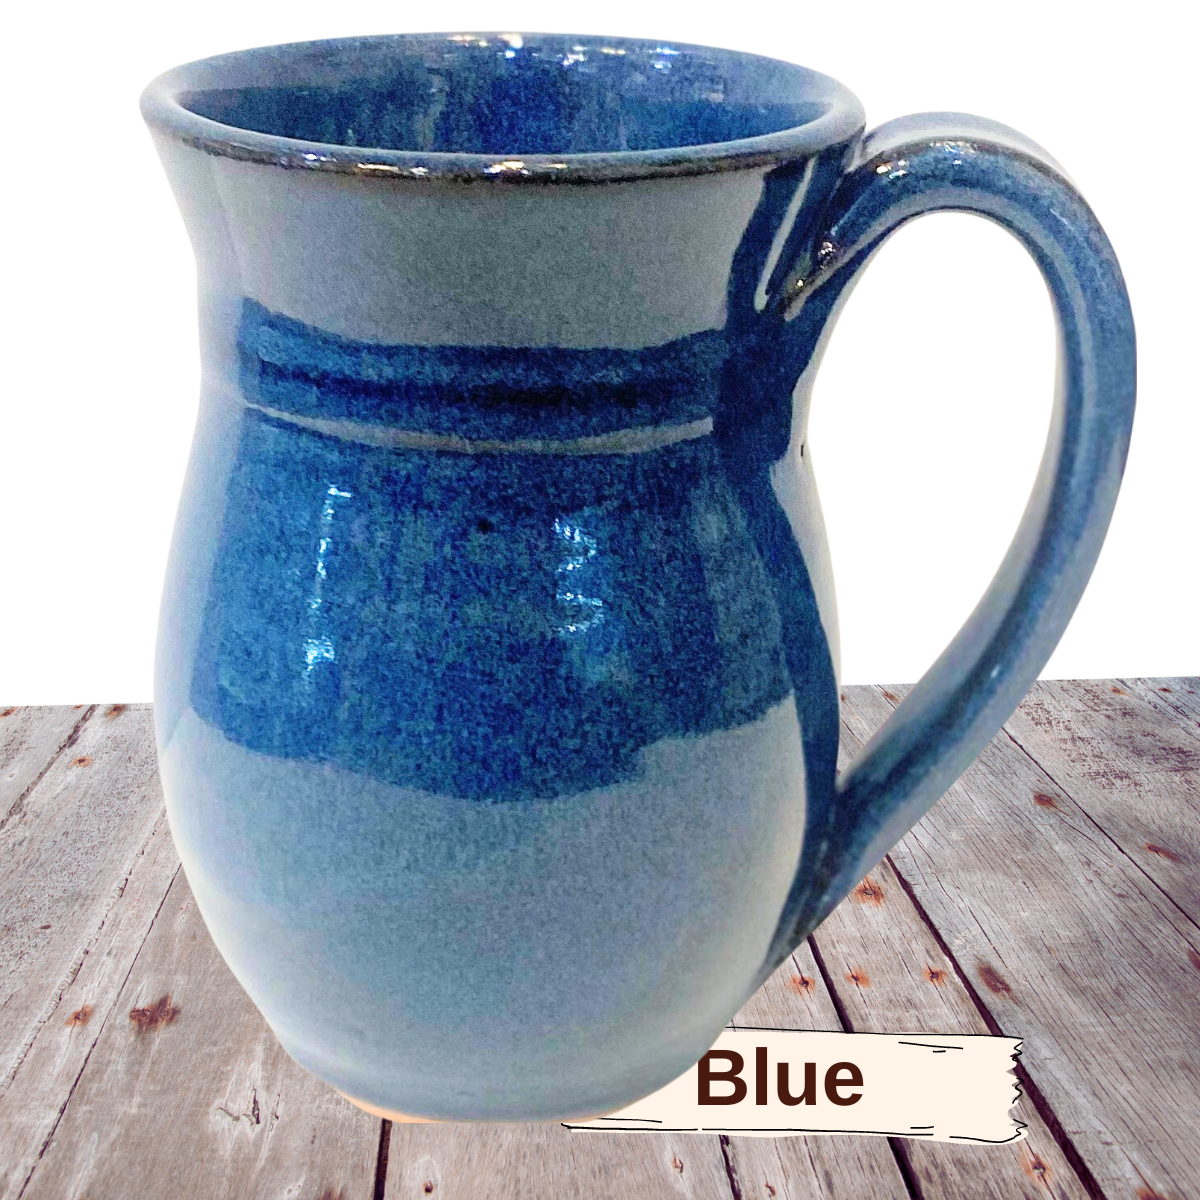 Coffee cup holds 12 ounces handmade pottery mug for coffee or tea. Study handle for 2 or 3 fingers